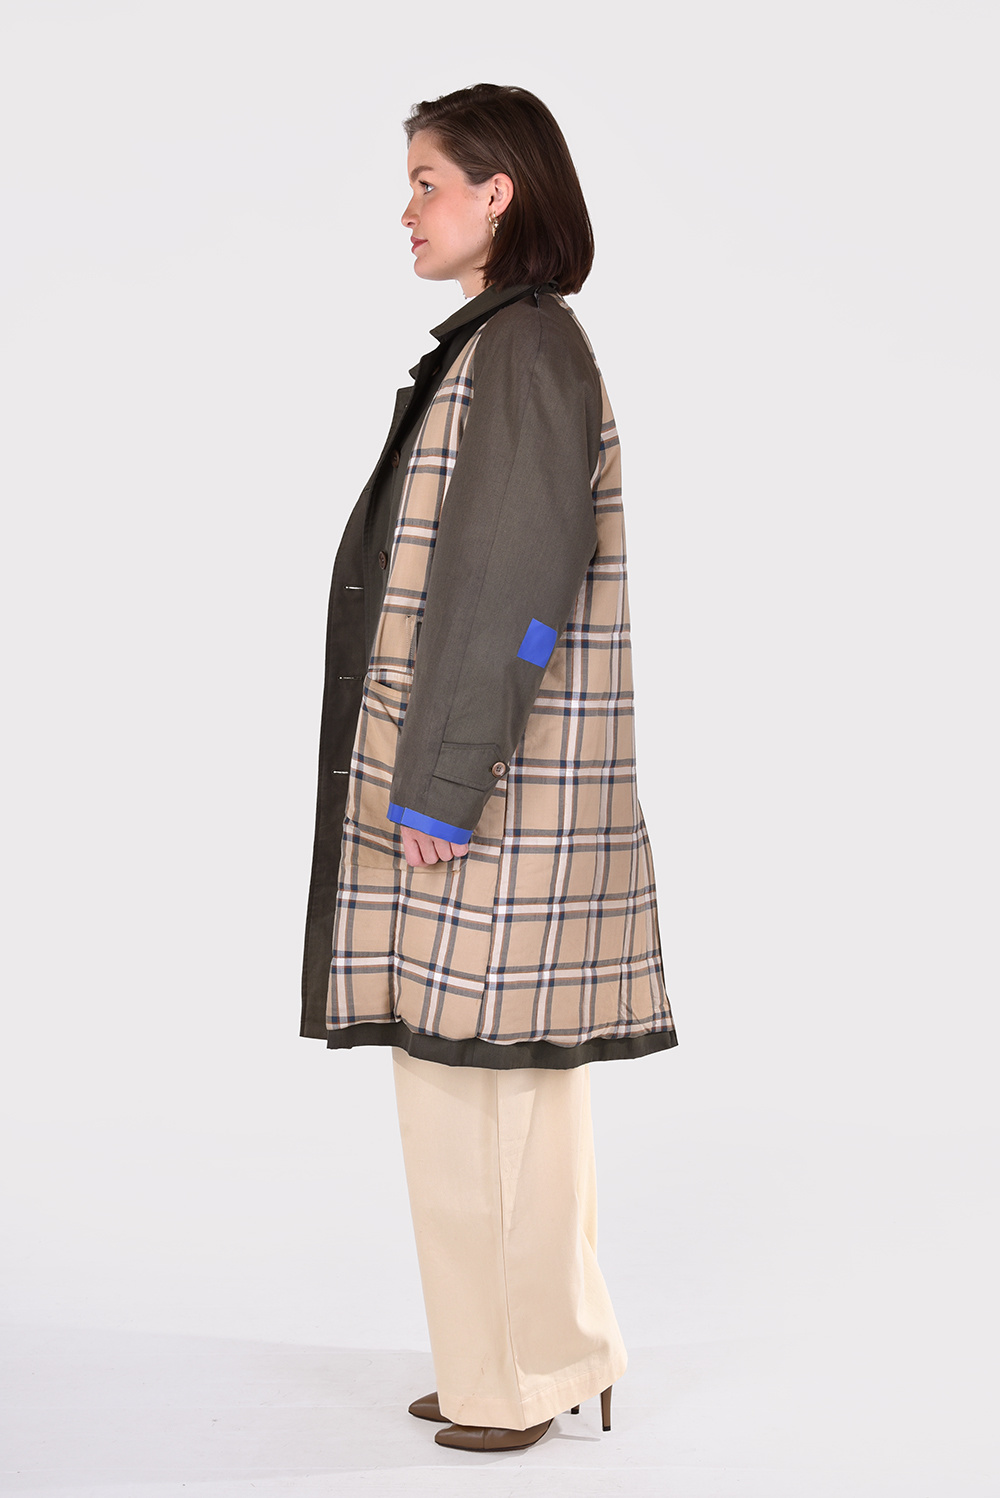 1/OFF Paris jas Trench Inside Burberry Quilted 1 - Marjon Snieders